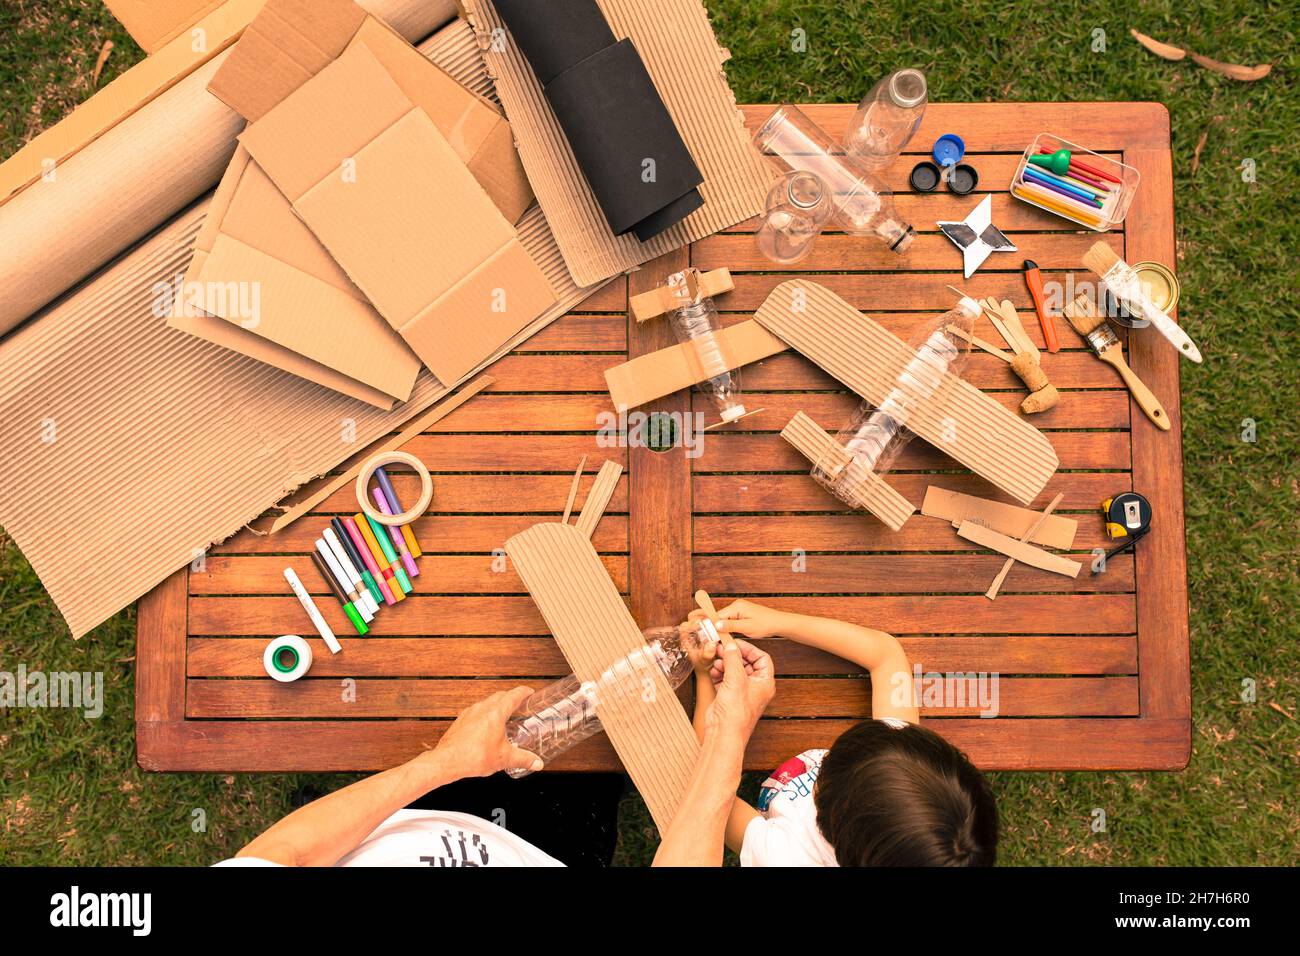 grandfather and grandson building airplanes with recycled material (cardboard, PVC bottles, wood). work ideas circular economy, recycling, environment Stock Photo